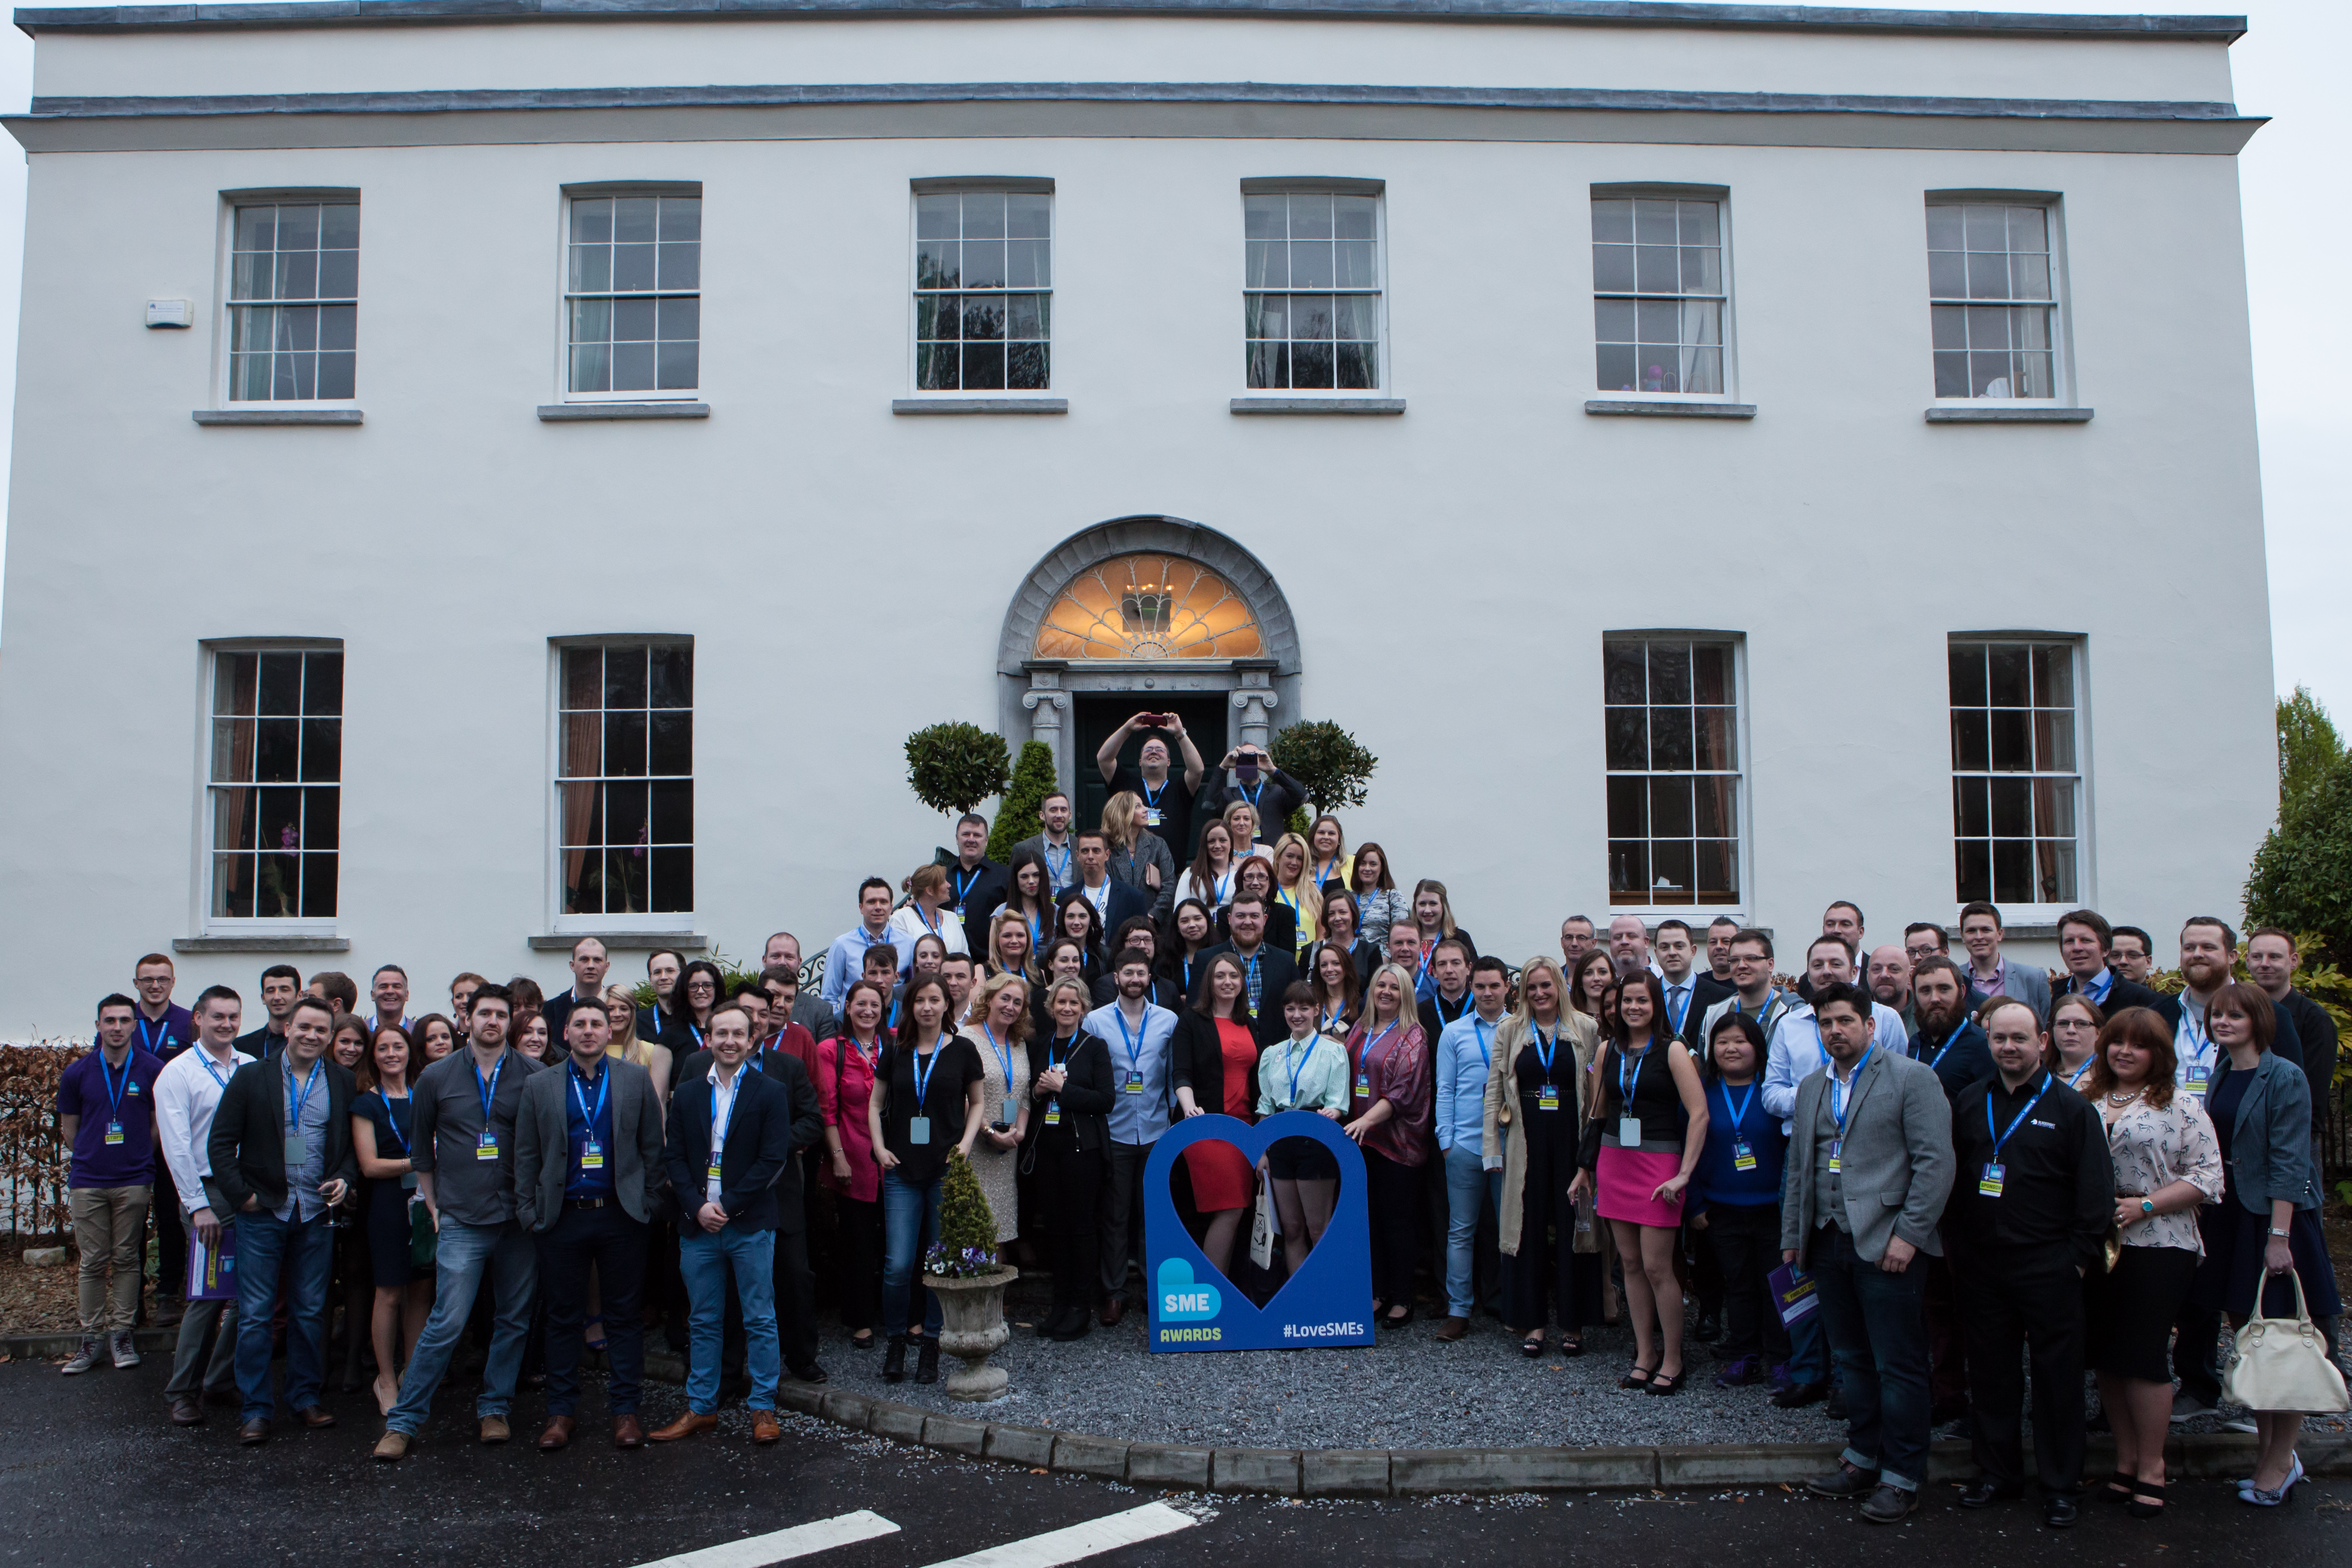 Group photo from the 2015 Blacknight SME Awards. Photo Credit: Ryan Whalley